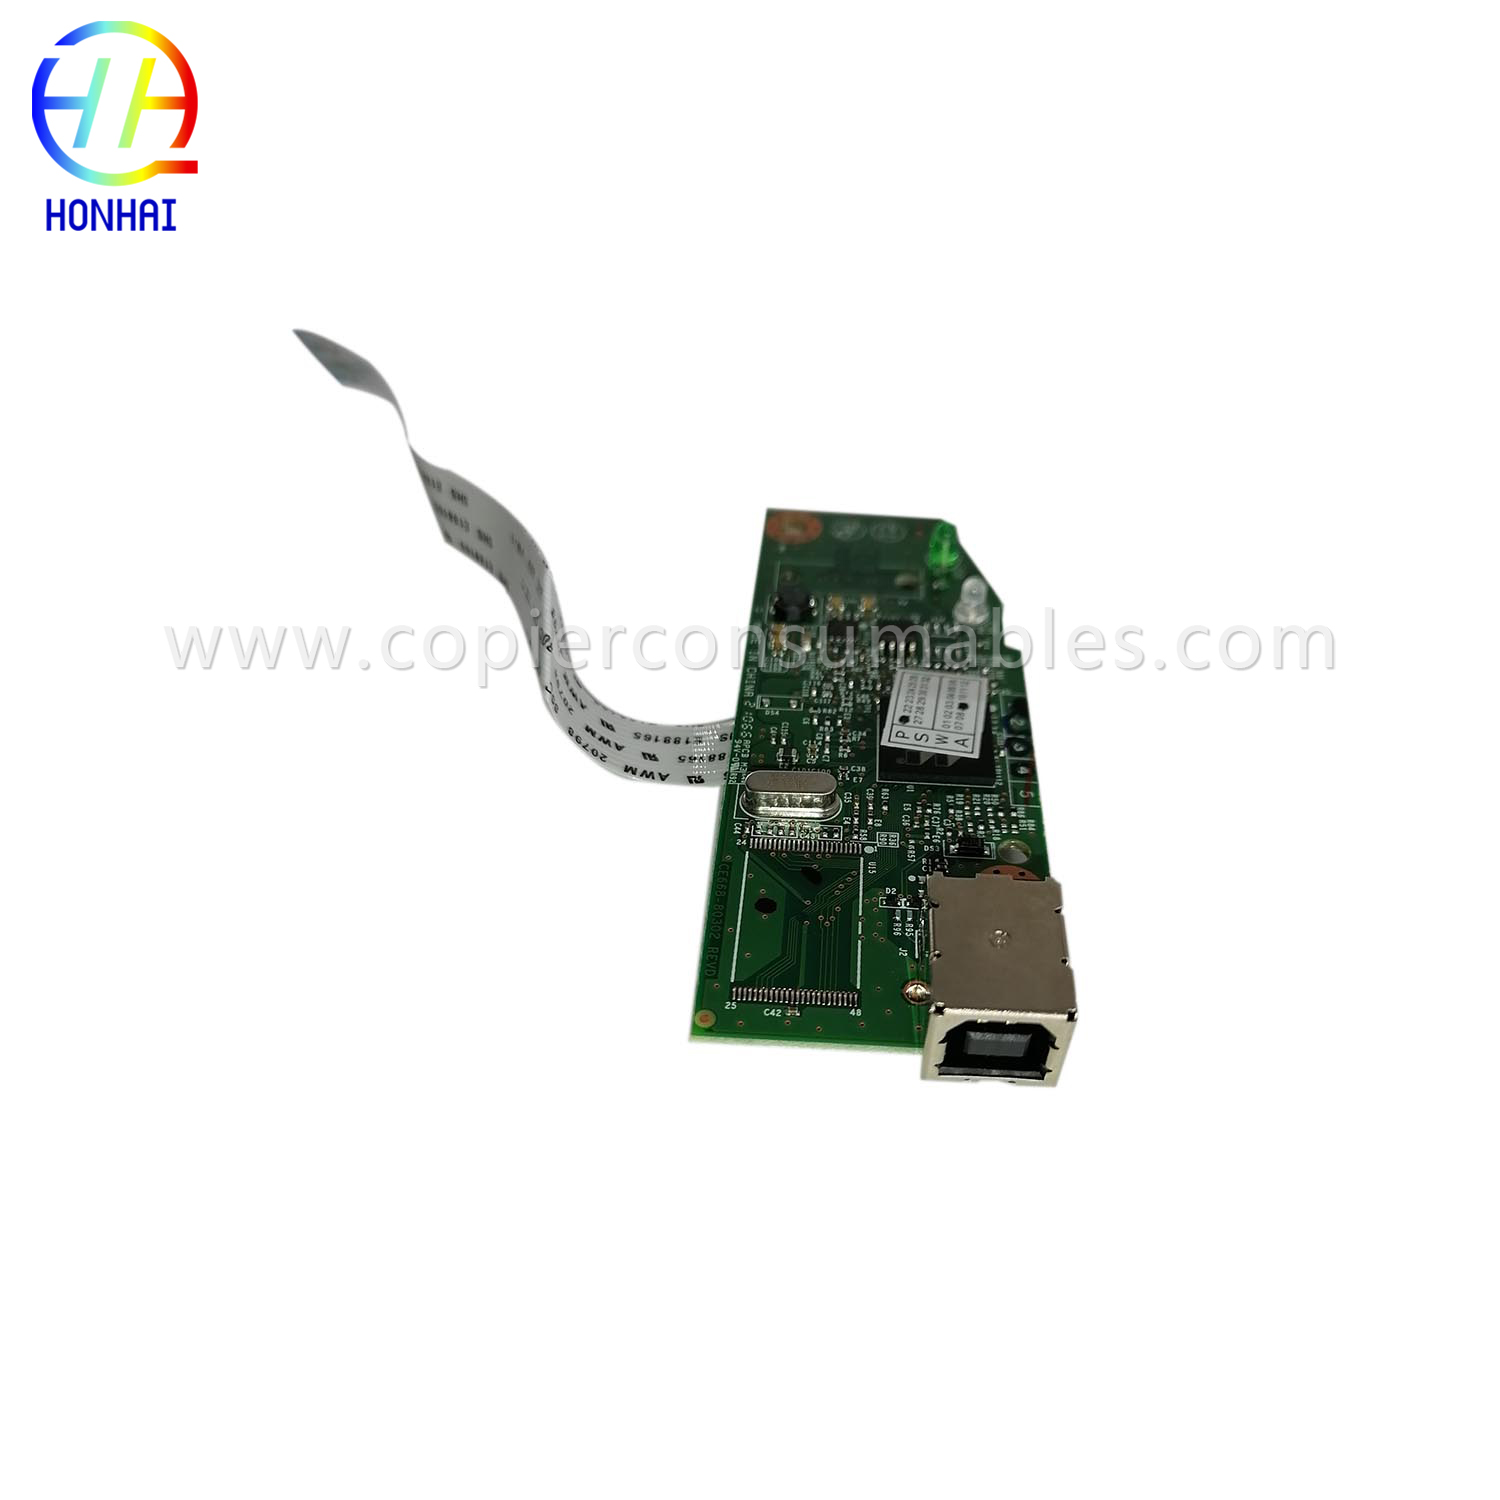 MAIN board for HP Laser jet 1102 RM1-7600-020CN (4)